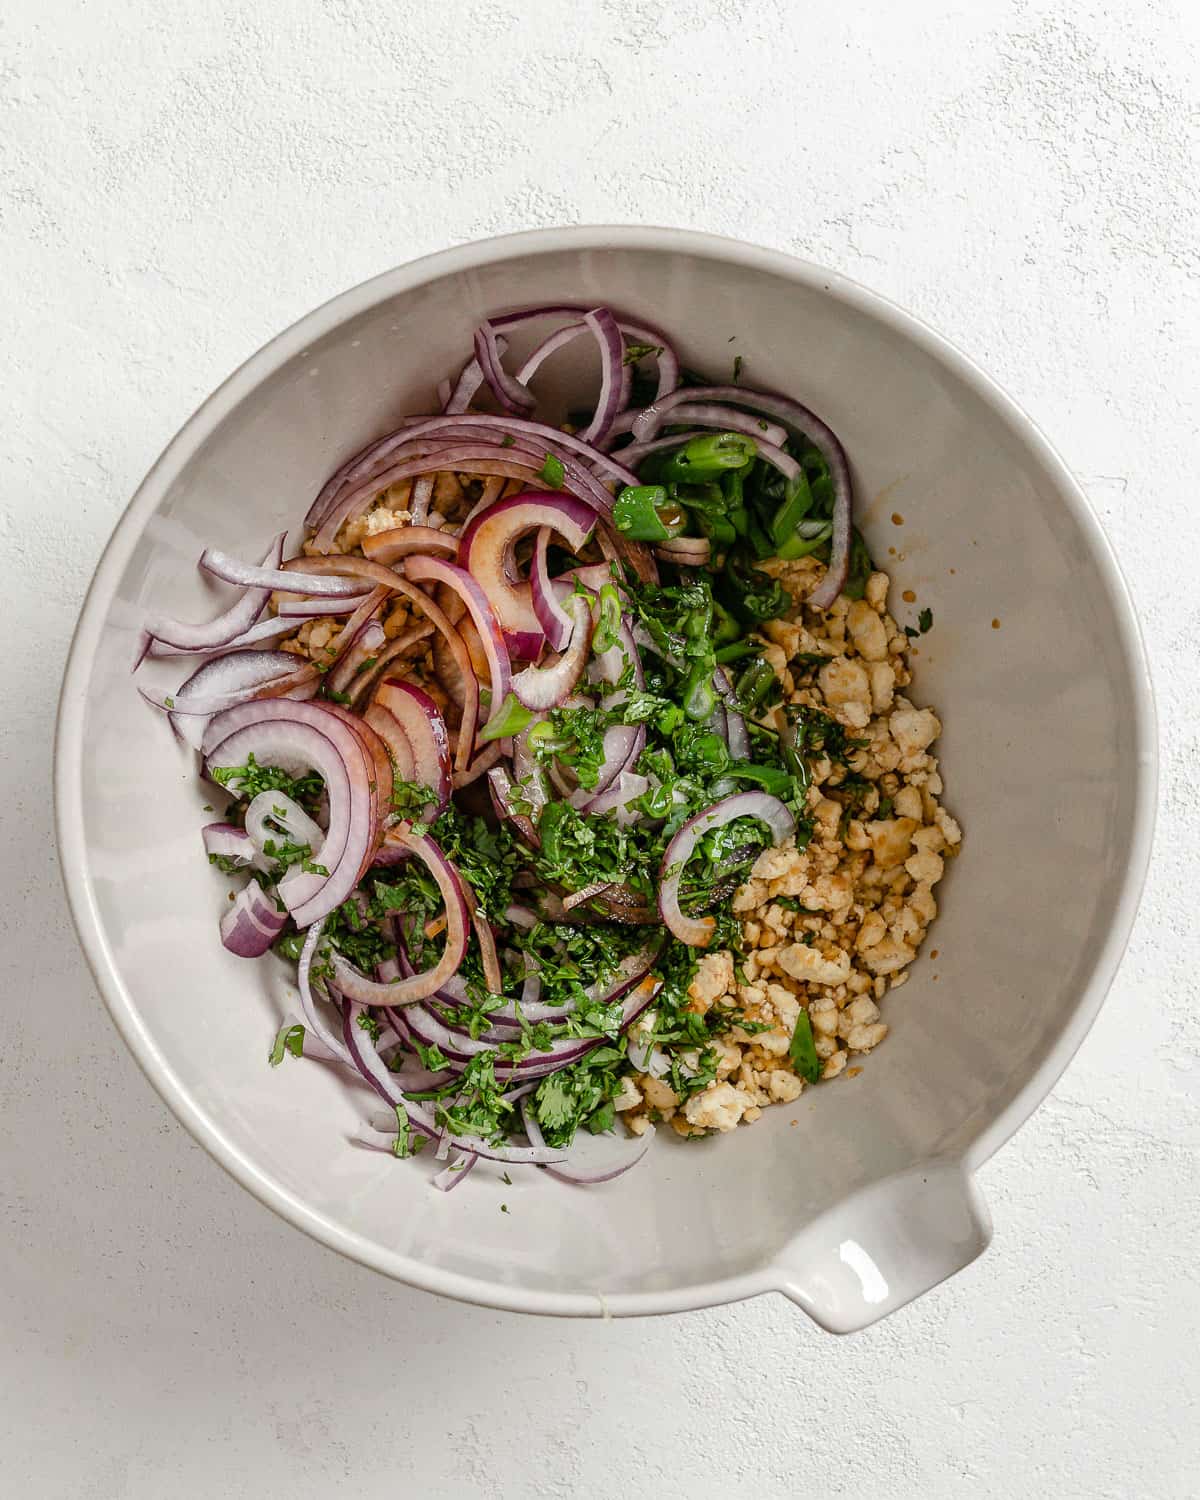 ingredients for larb salad in a white bowl against a white background